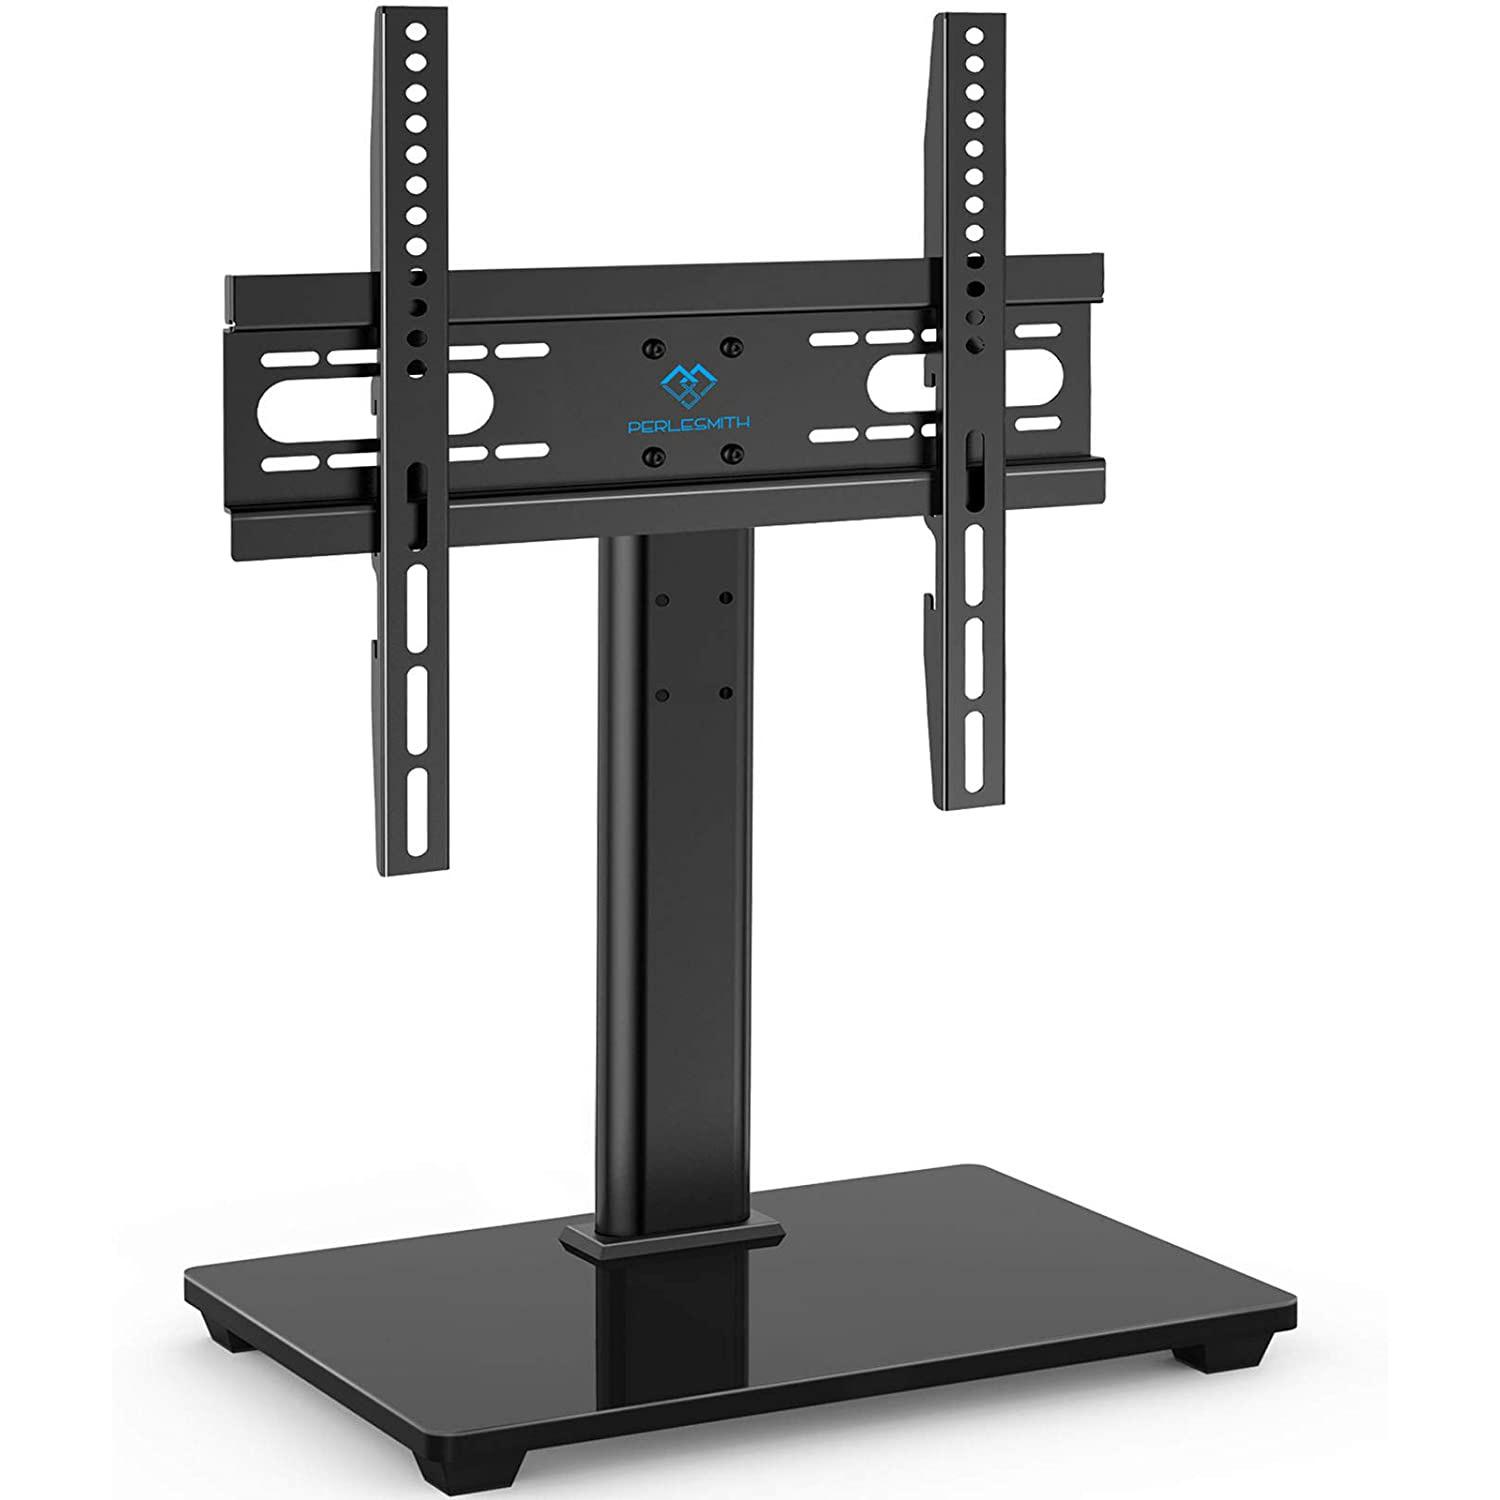 Perlesmith Universal 37-55 TV Stand for $19.99 Shipped